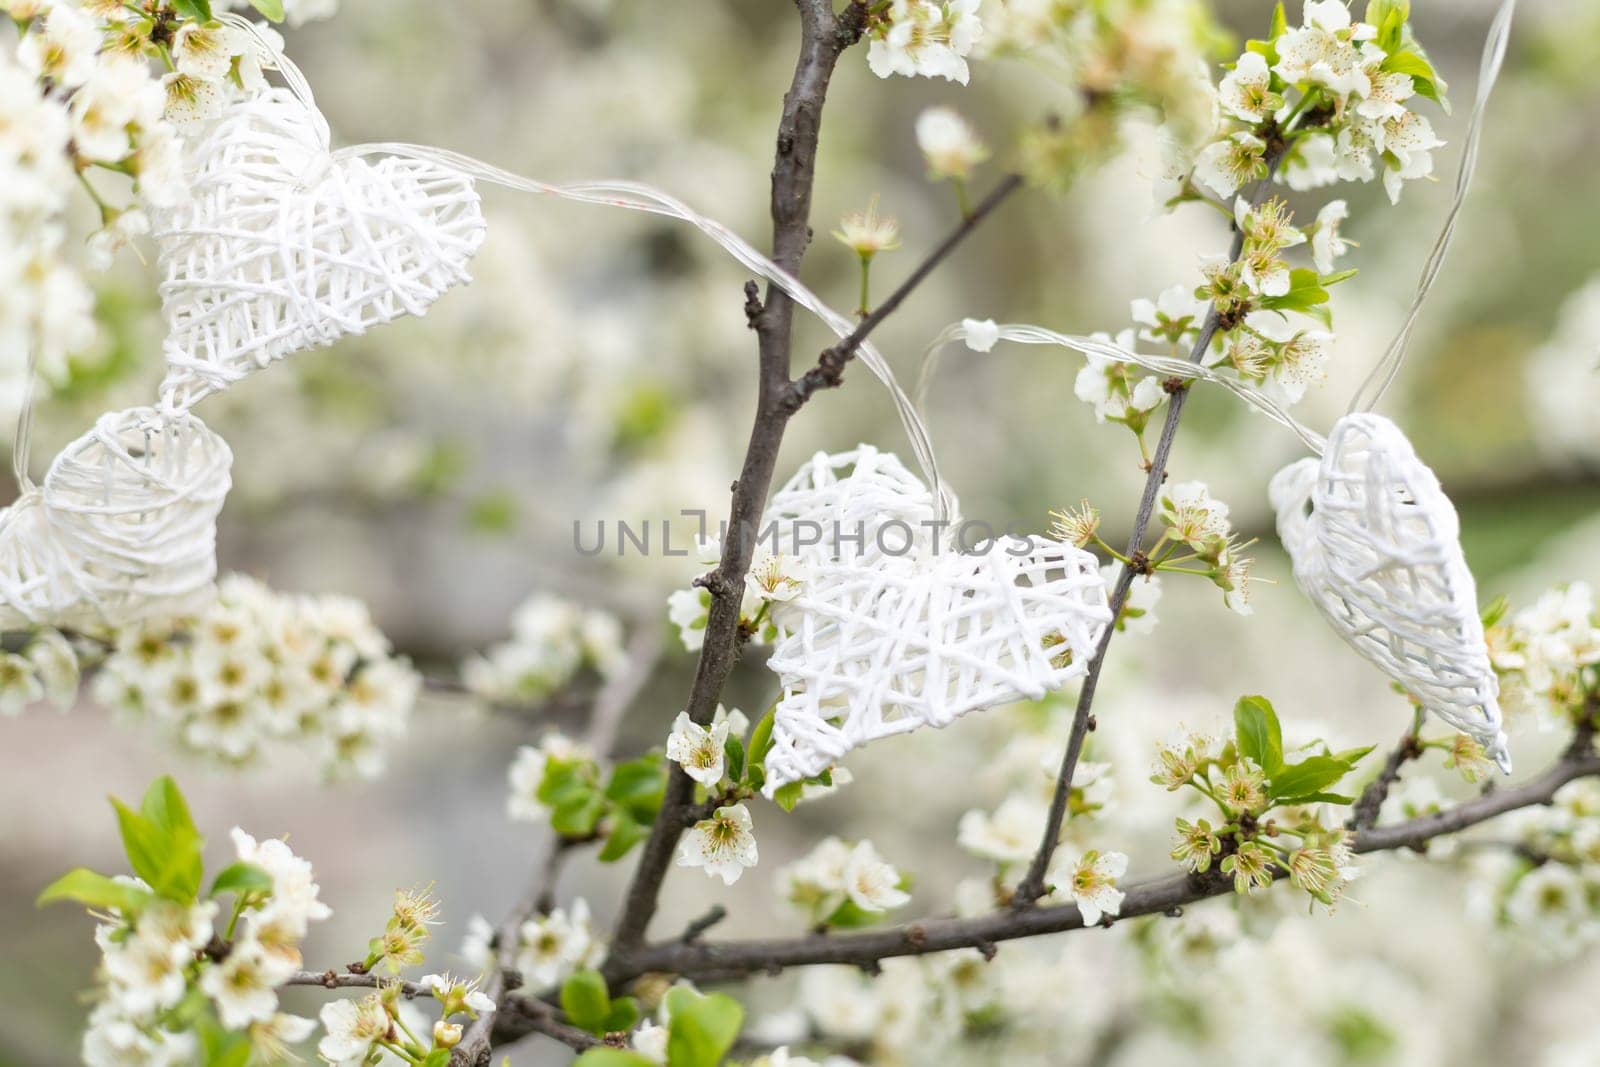 Hands touch heart a branch of an apple tree blooming with white flowers. Apple blossom. Love nature.